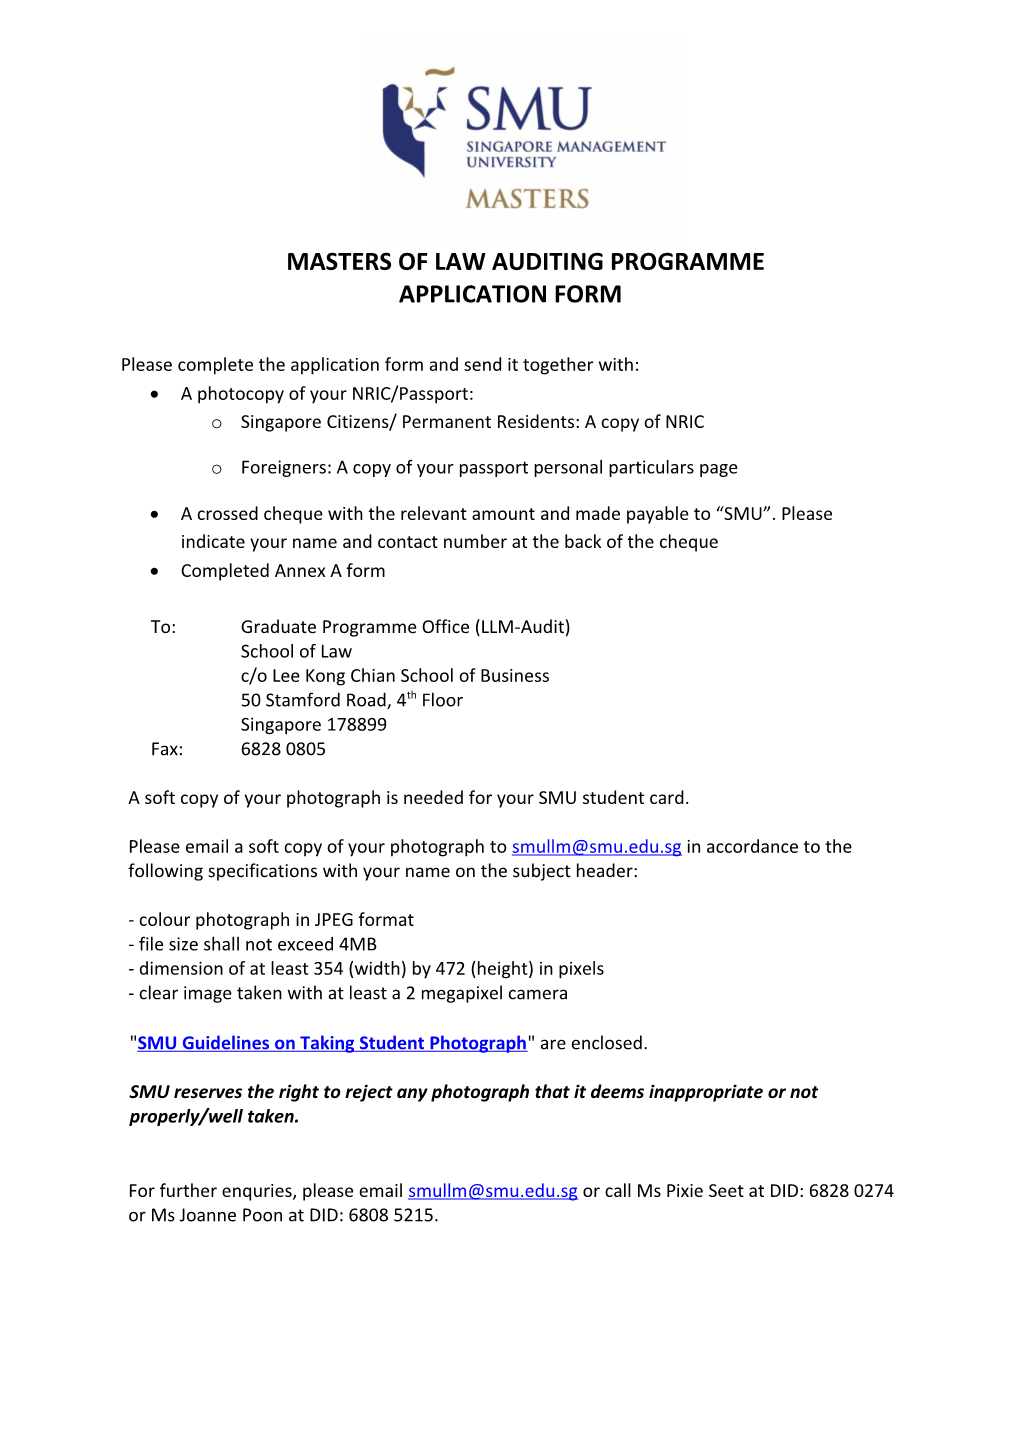 Masters of Law Auditing Programme